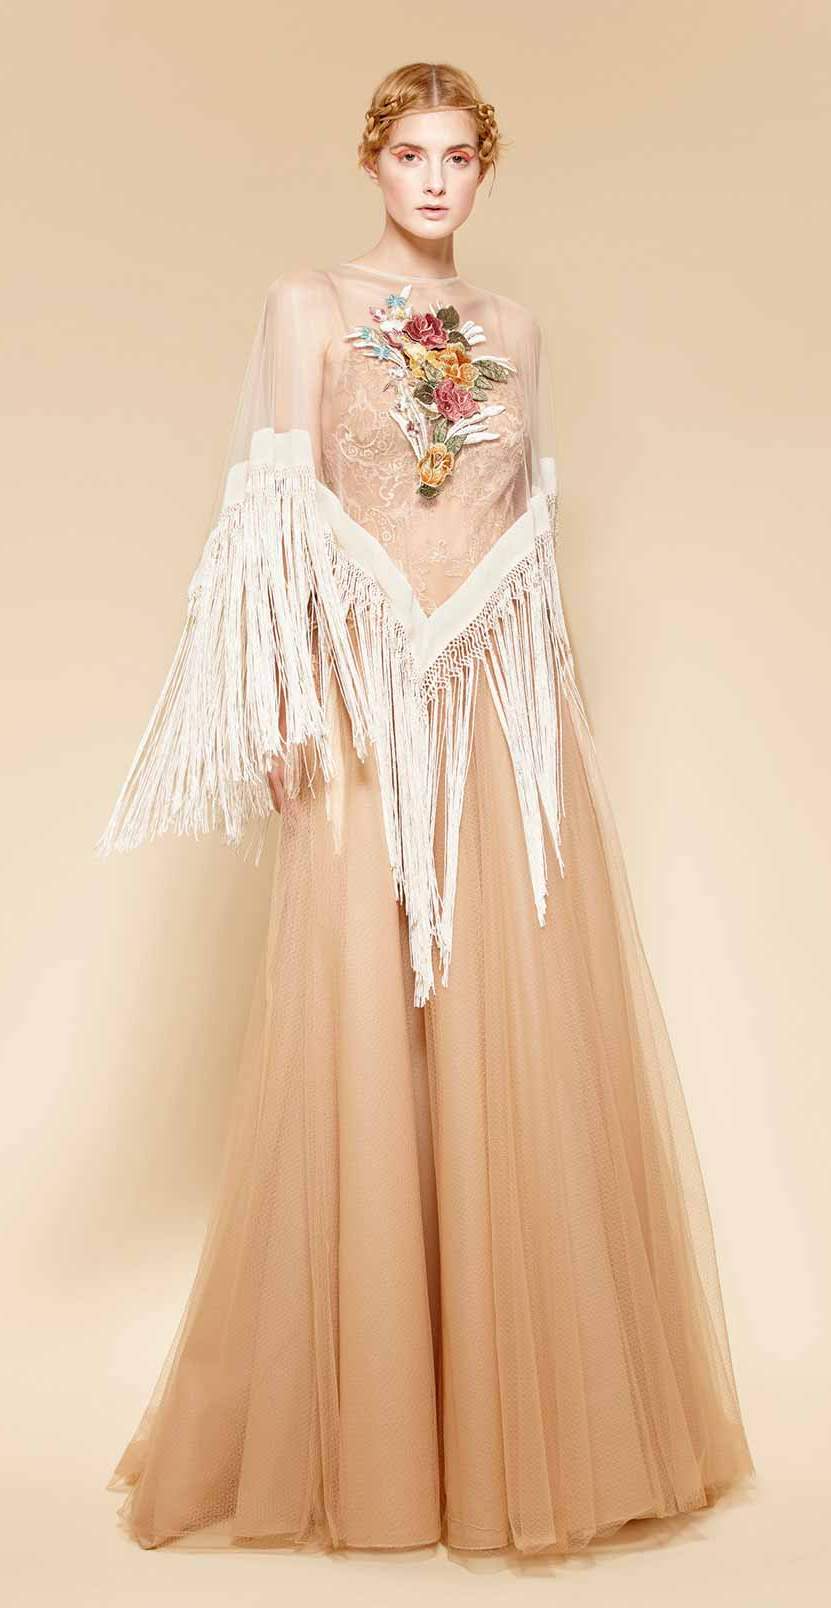 Couture lingerie nude dress with ethereal and delicate silhouette